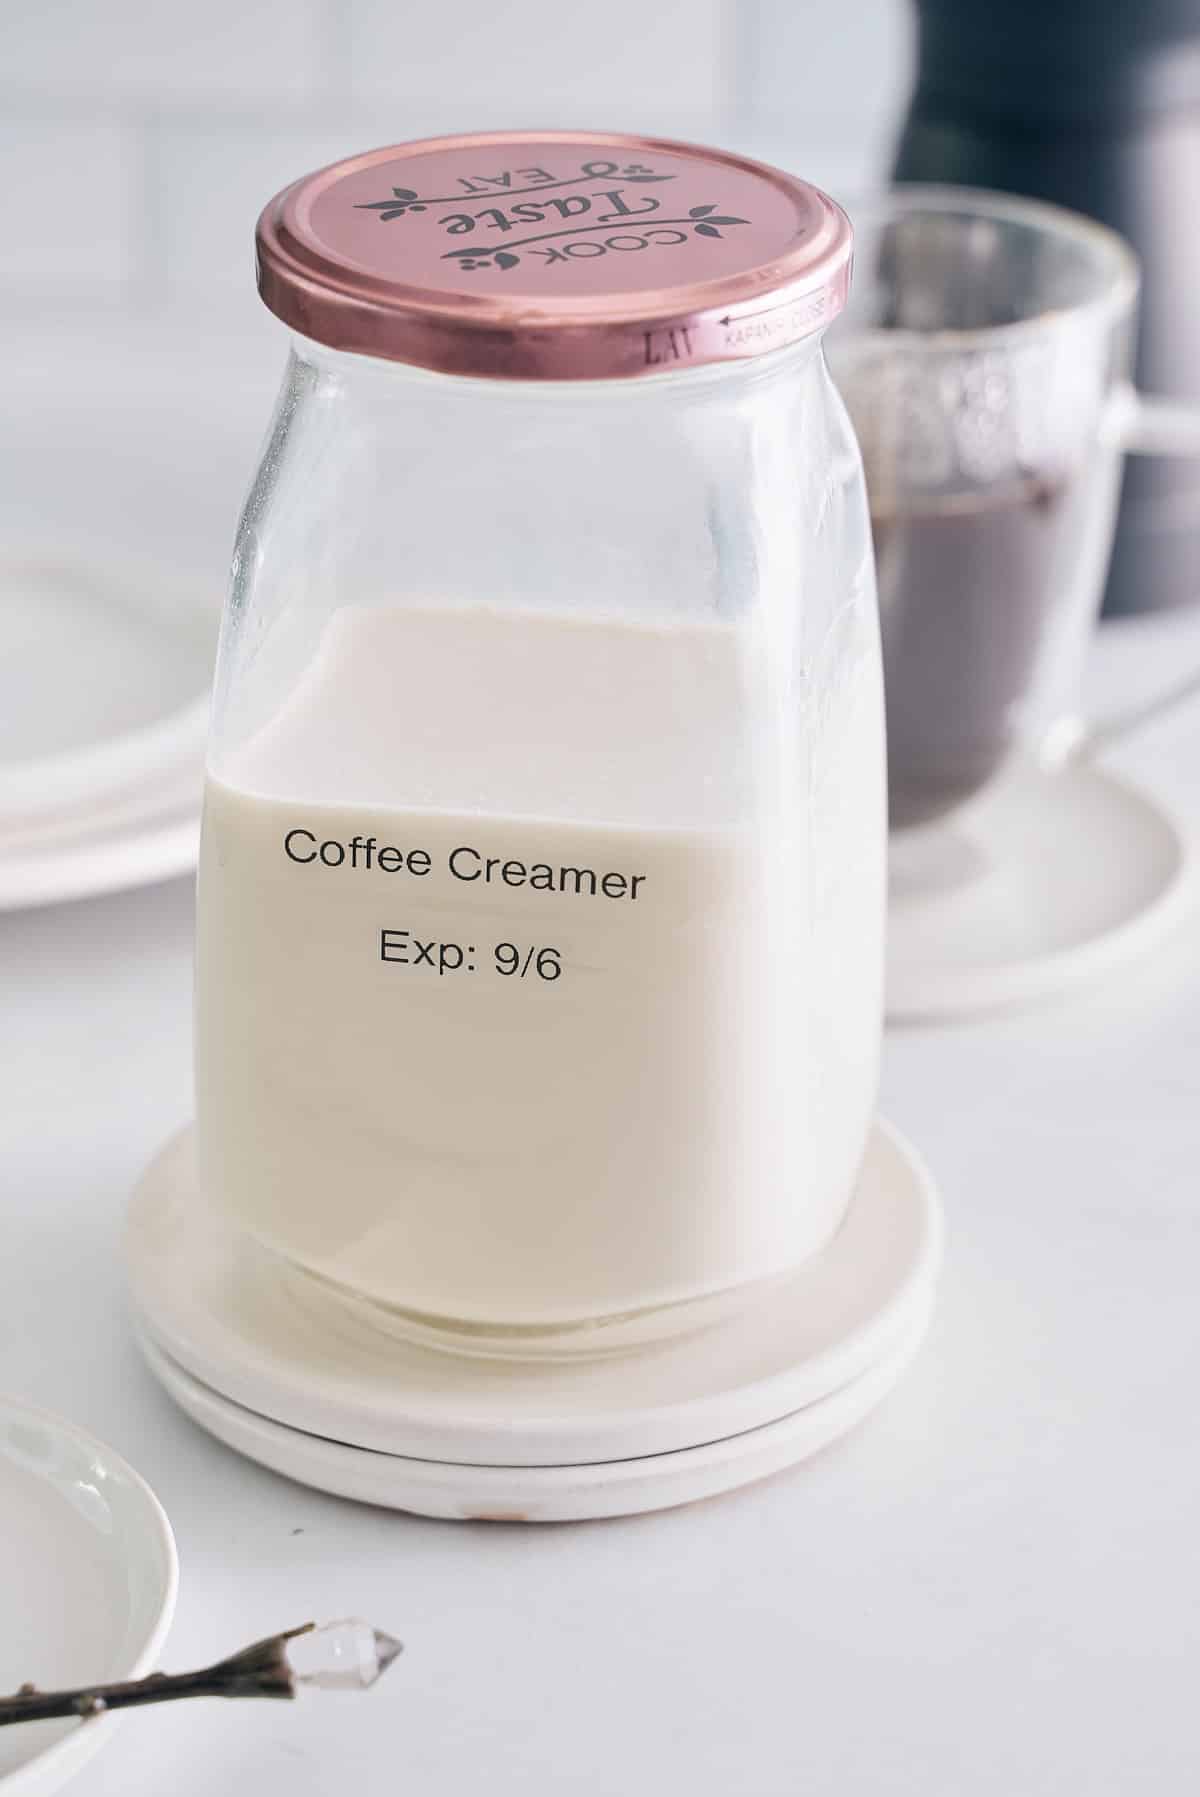 Sealed and labeled jar of homemade coffee creamer.